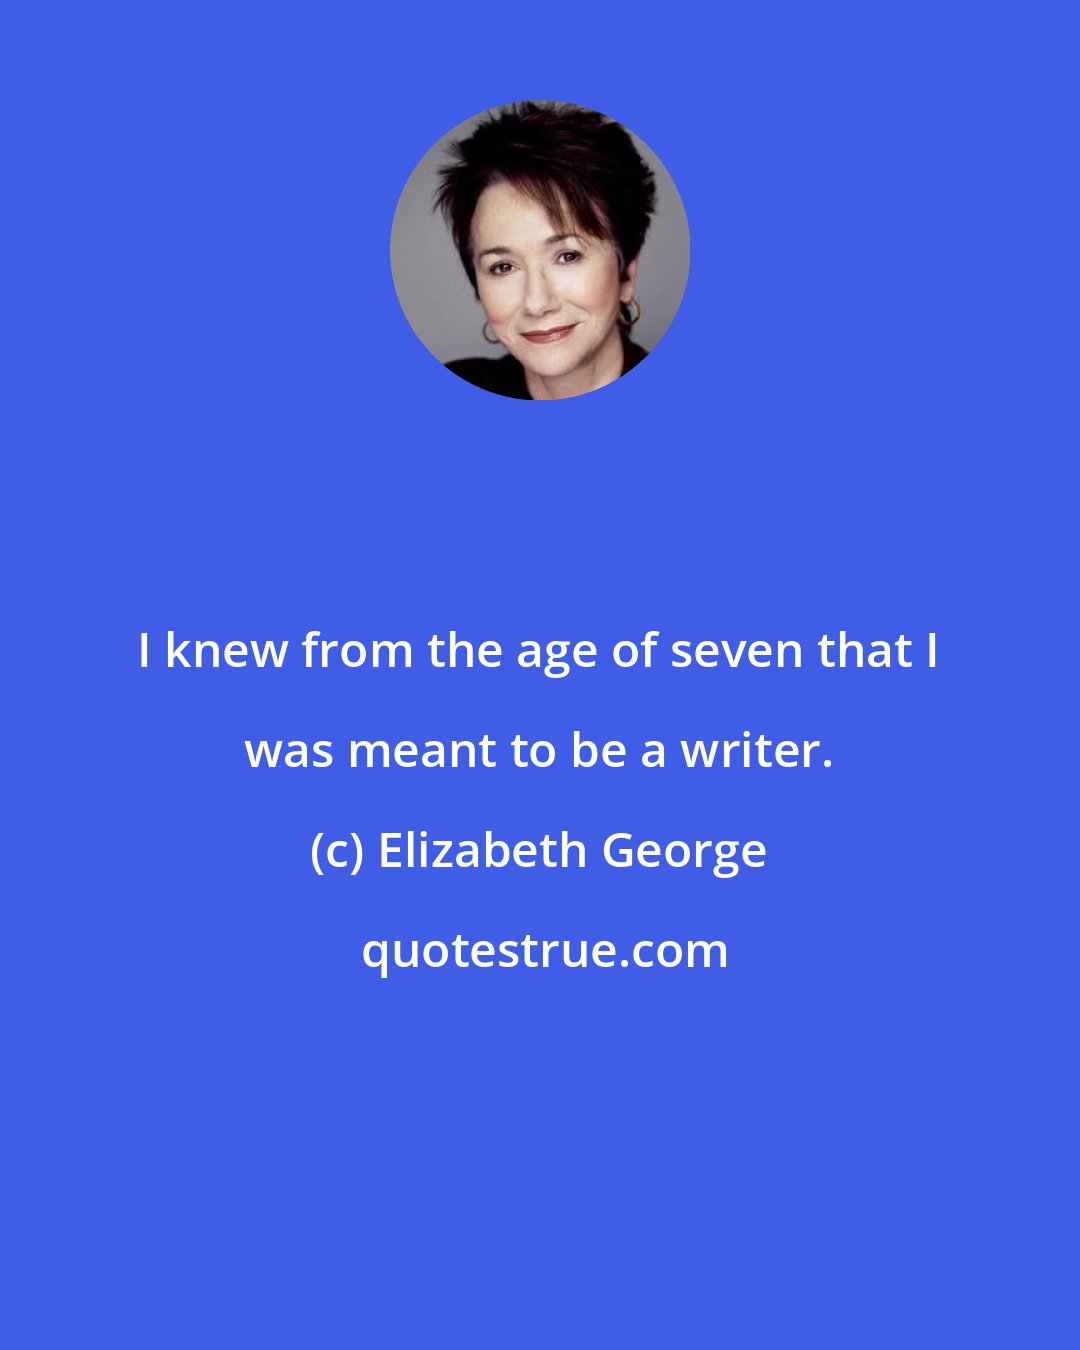 Elizabeth George: I knew from the age of seven that I was meant to be a writer.